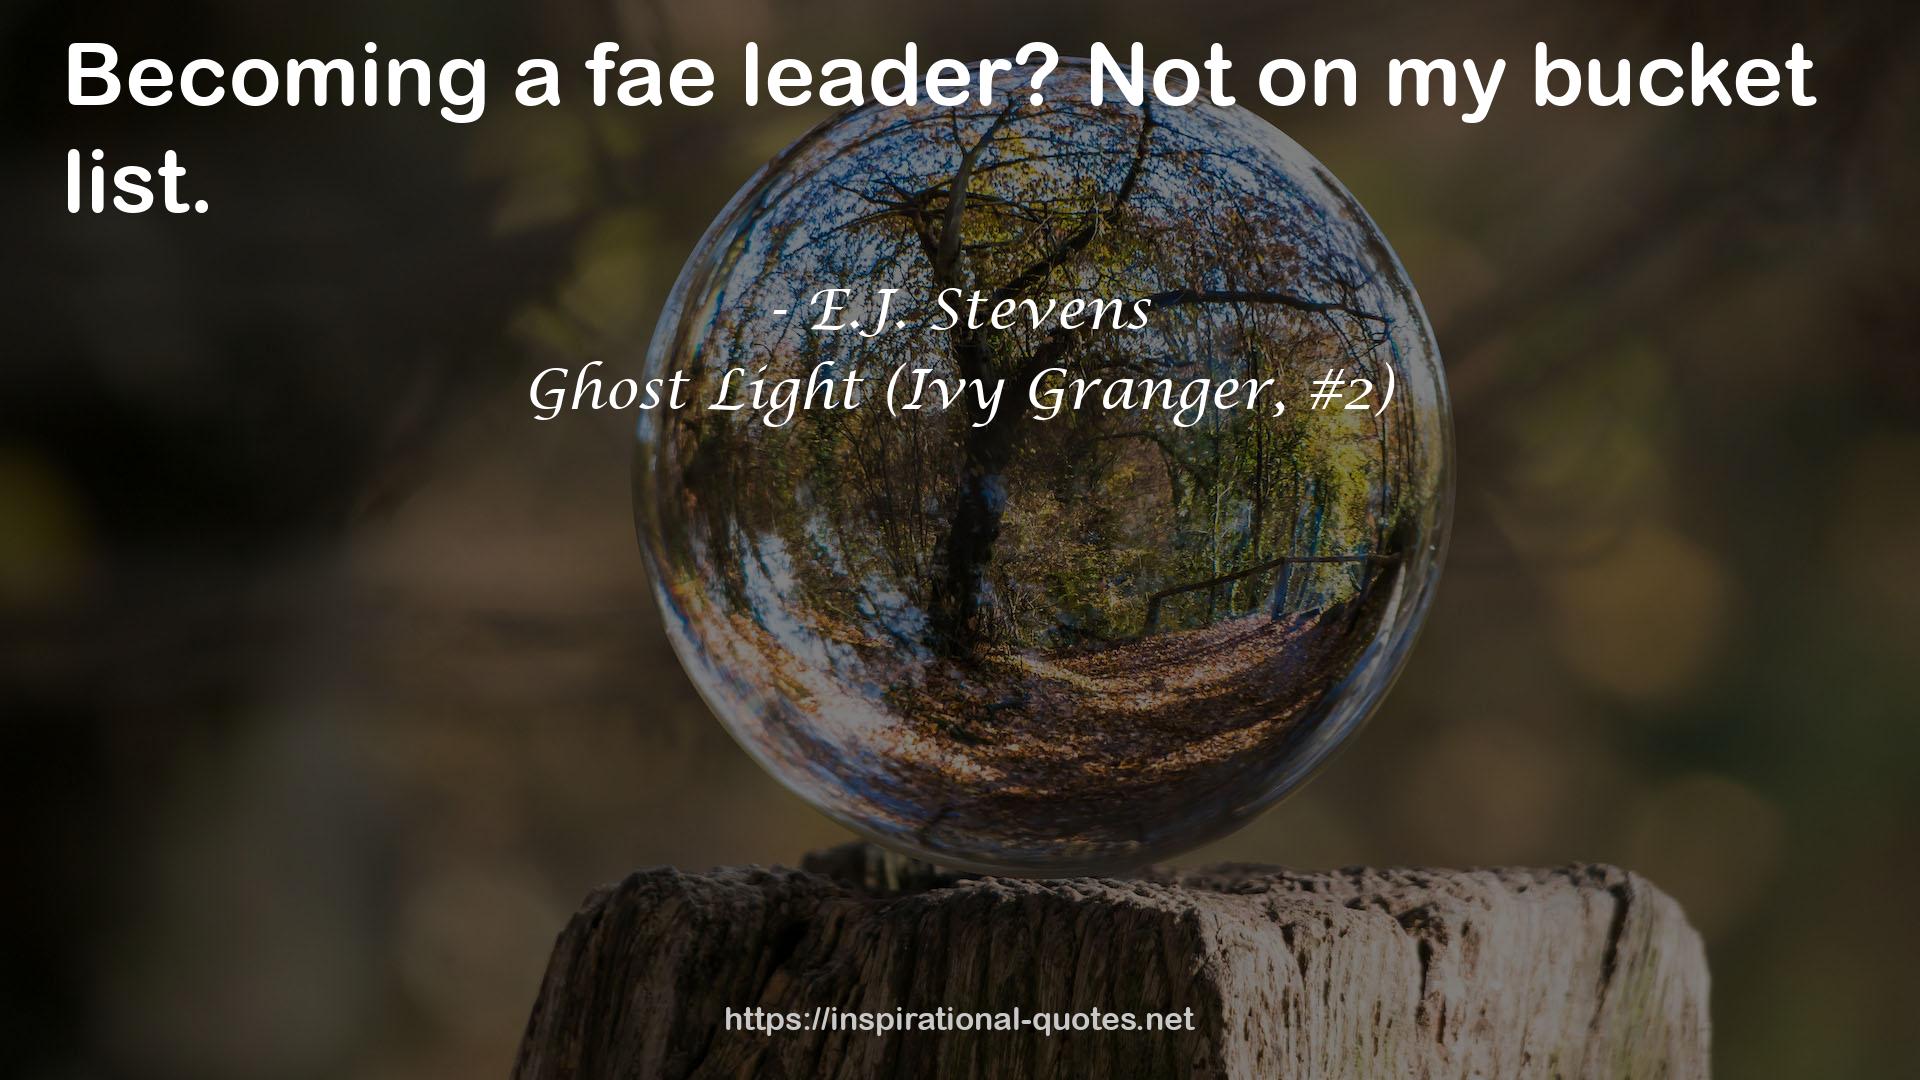 Ghost Light (Ivy Granger, #2) QUOTES